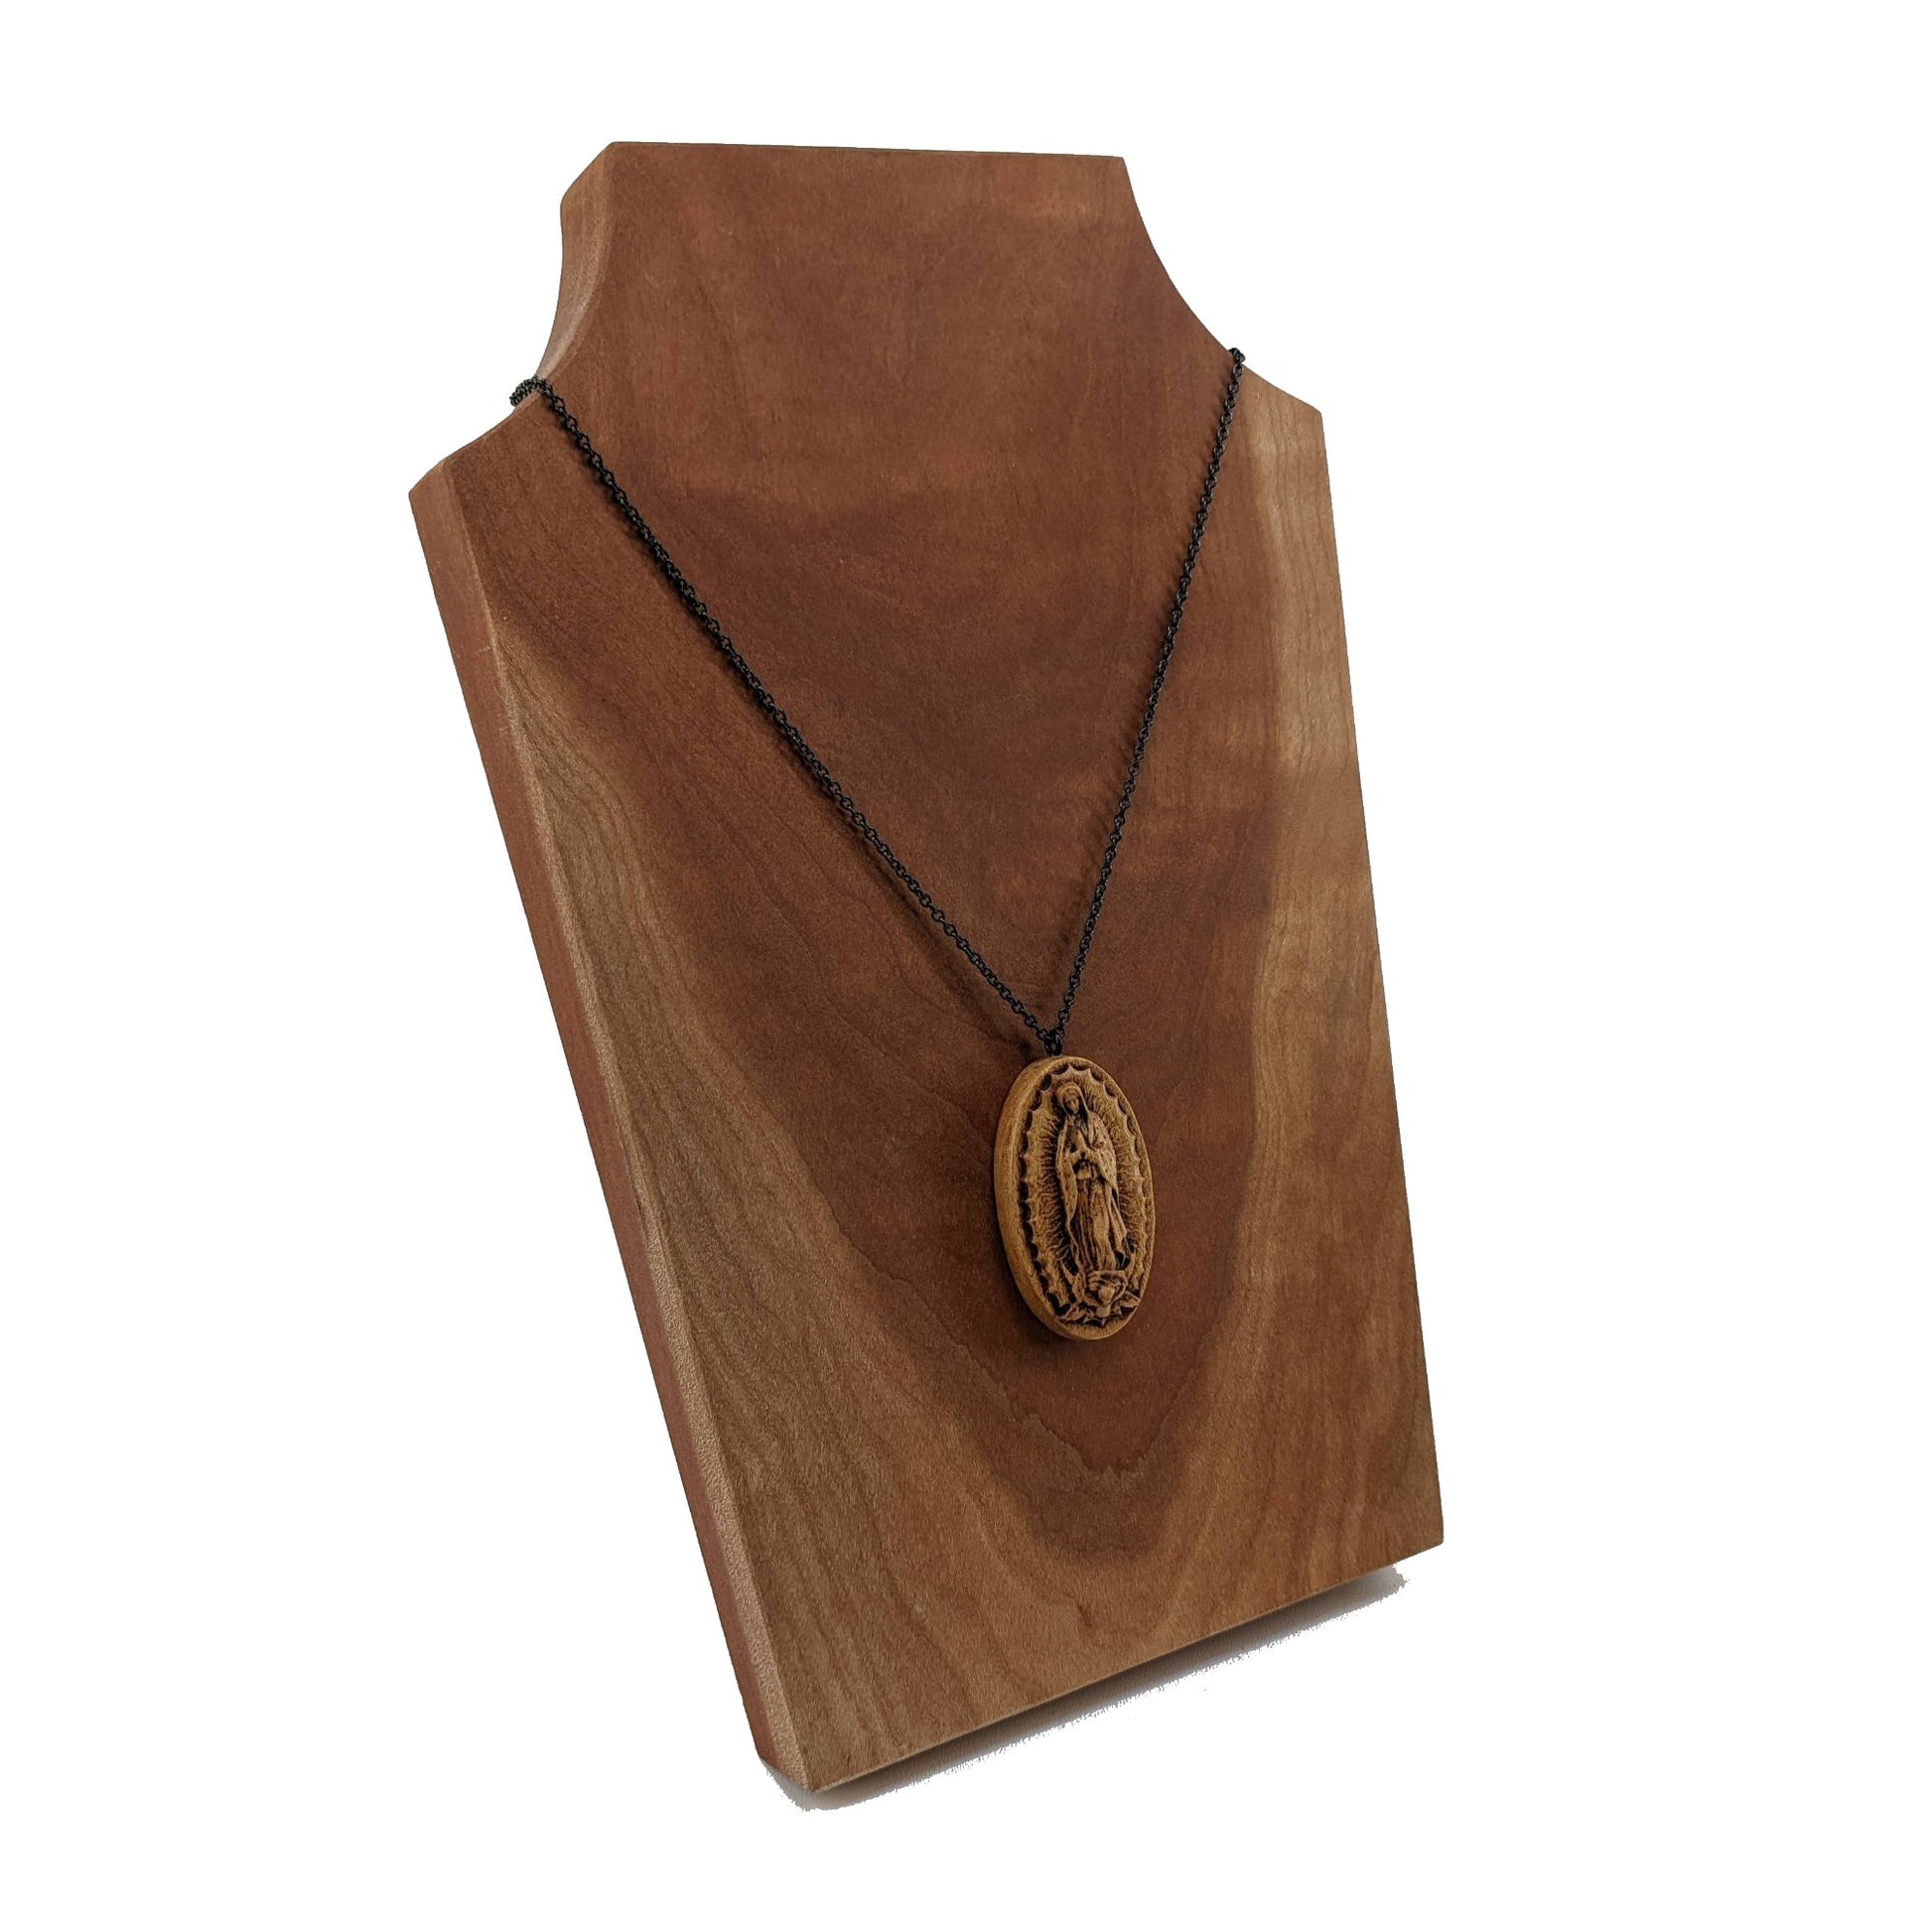 Oval wooden necklace pendant carved in the shape of Guadalupe. Made from hard maple and hanging from a black stainless steel chain against a cherry wood  background.